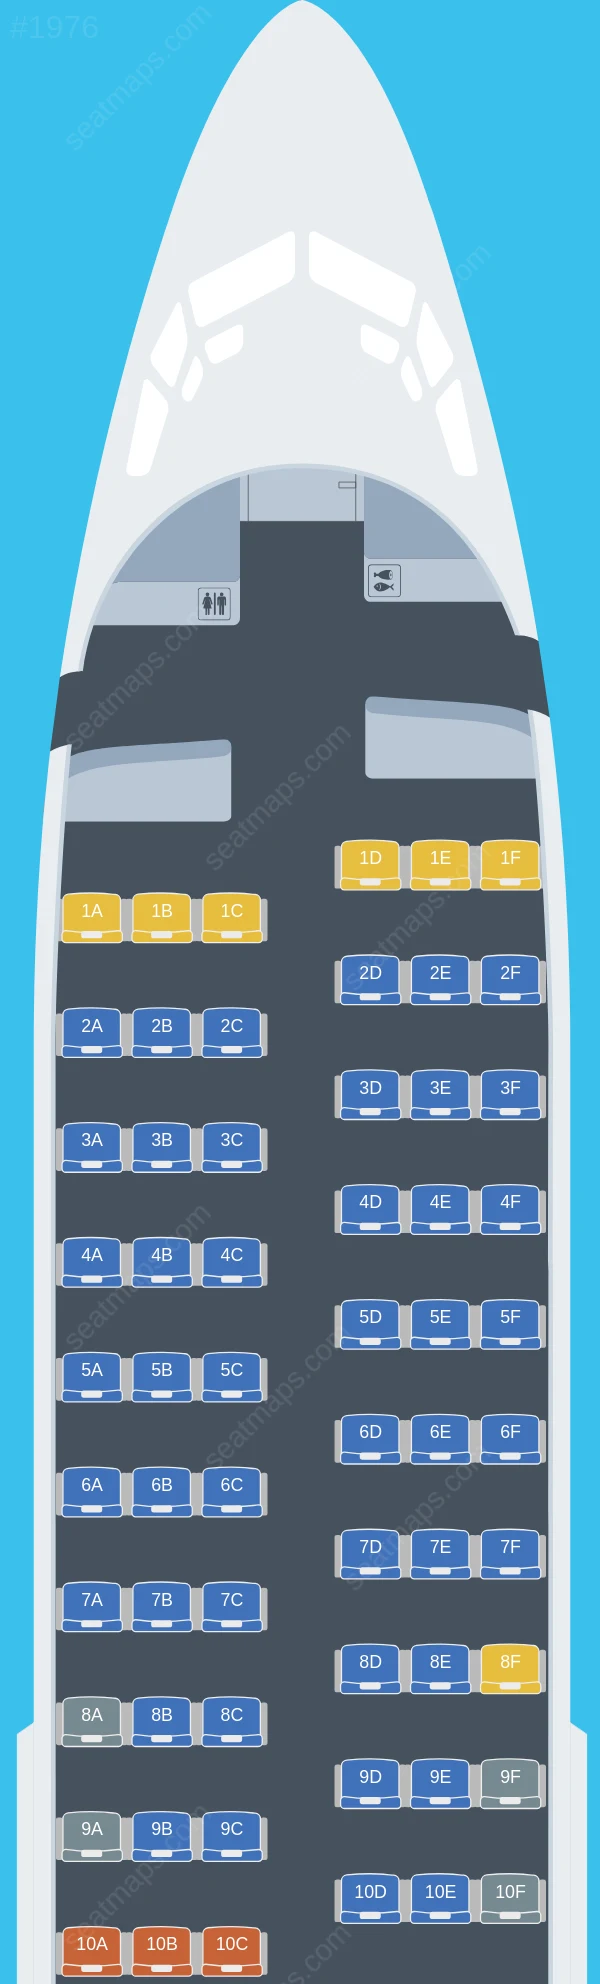 Southwest Airlines Boeing 737-700 seatmap preview